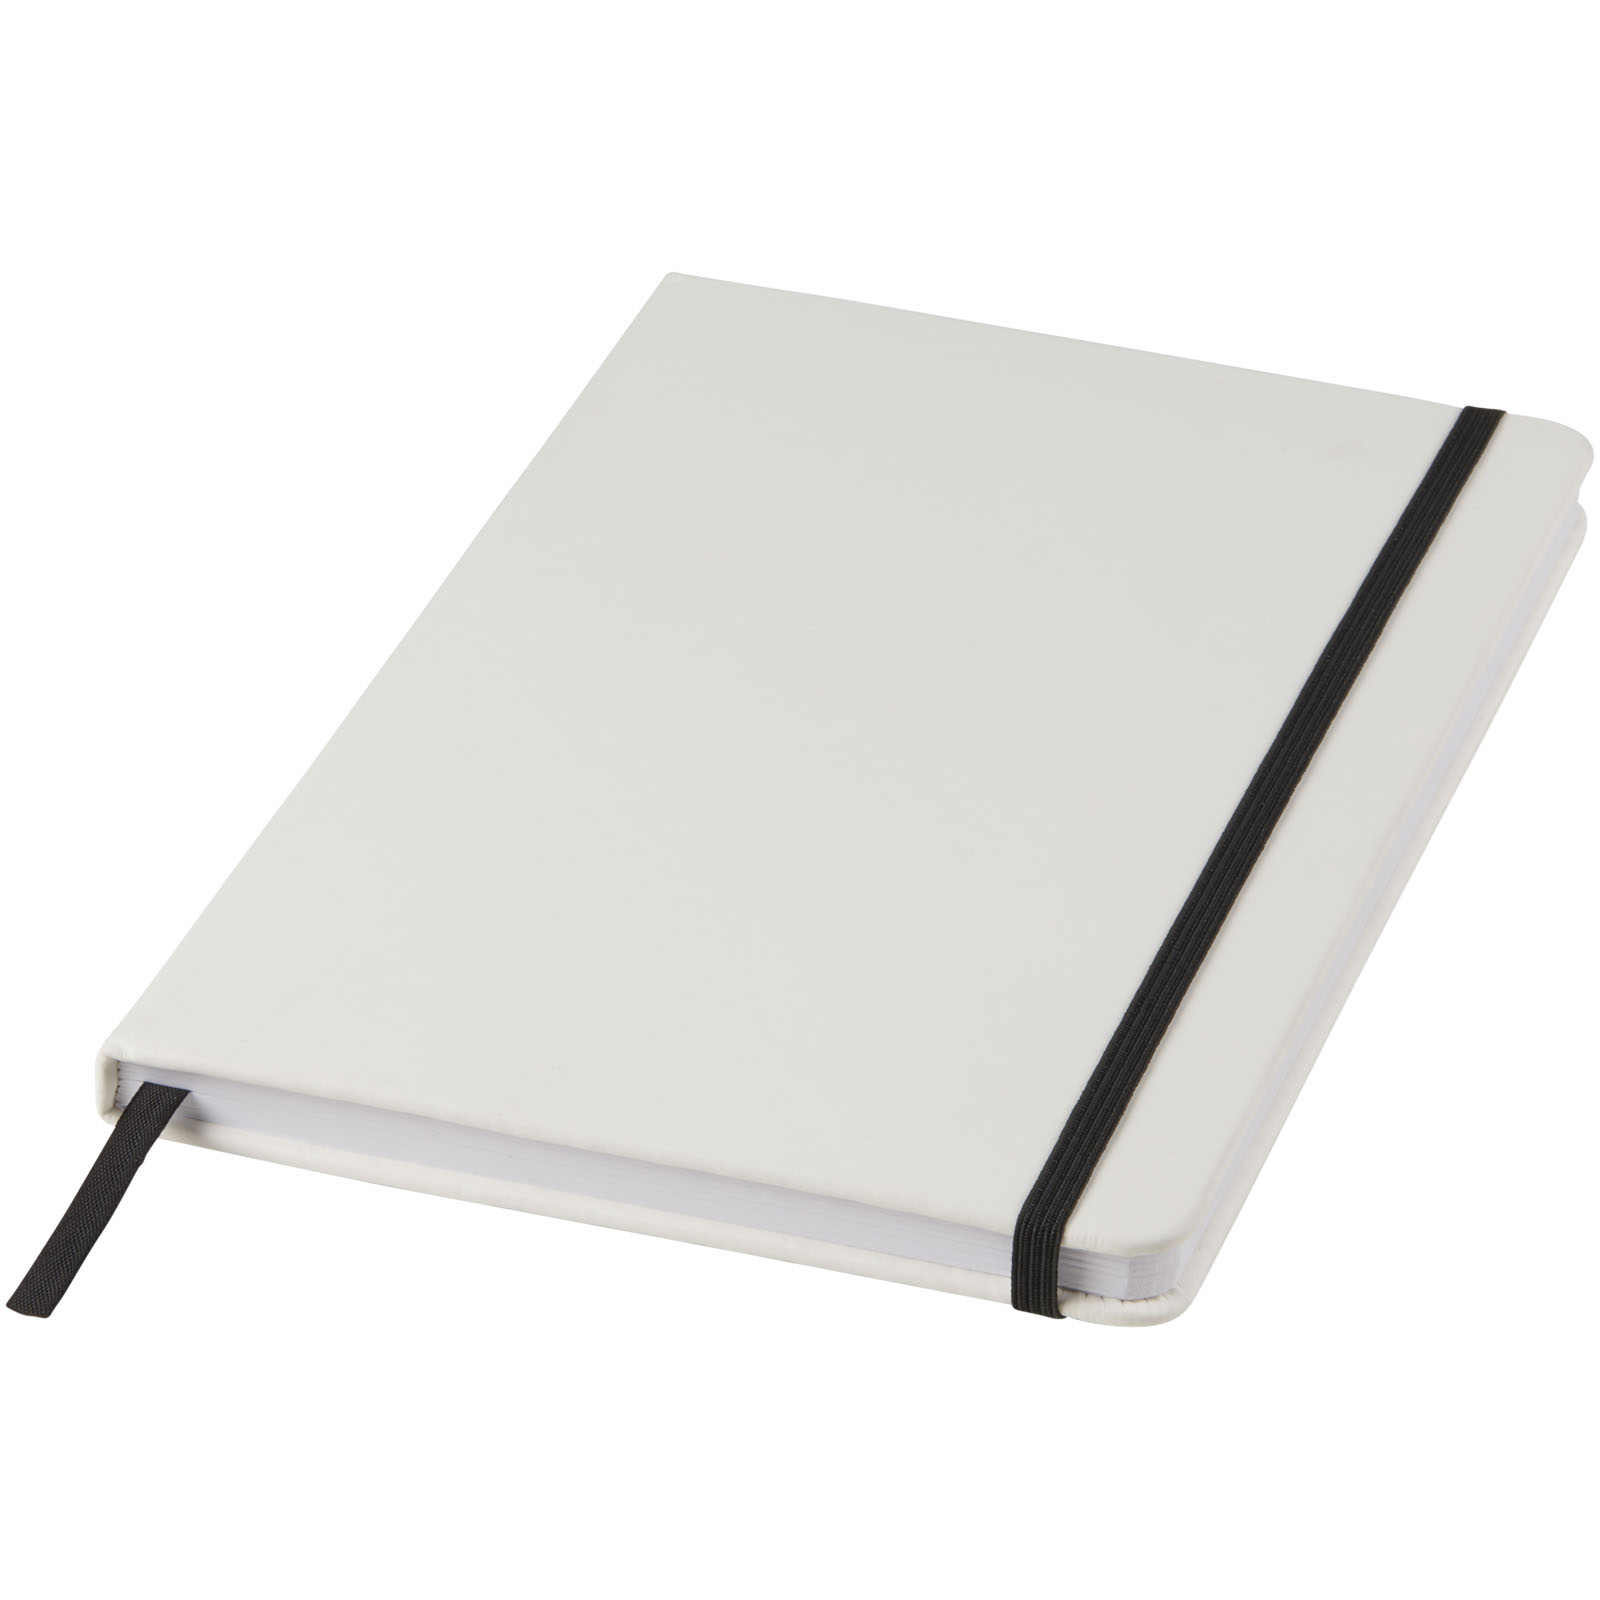 Hard cover notebooks - Spectrum A5 white notebook with coloured strap